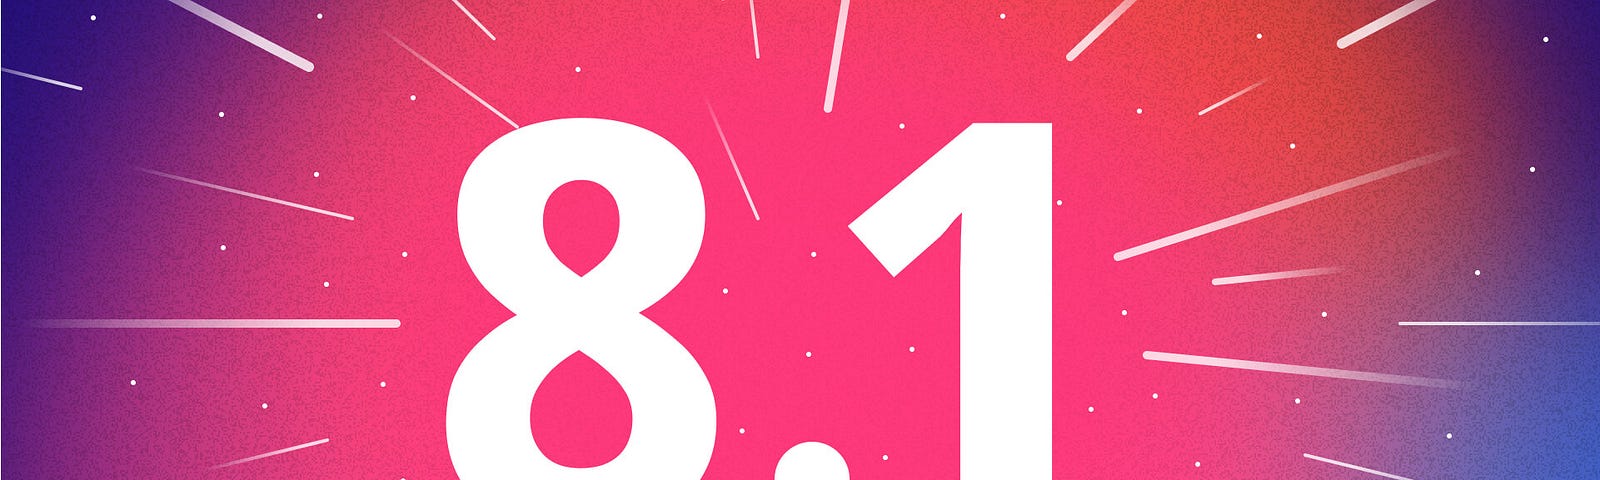 A bold “8.1” on a pink and purple gradient star field, with action lines leading away from it, making it look “fast”